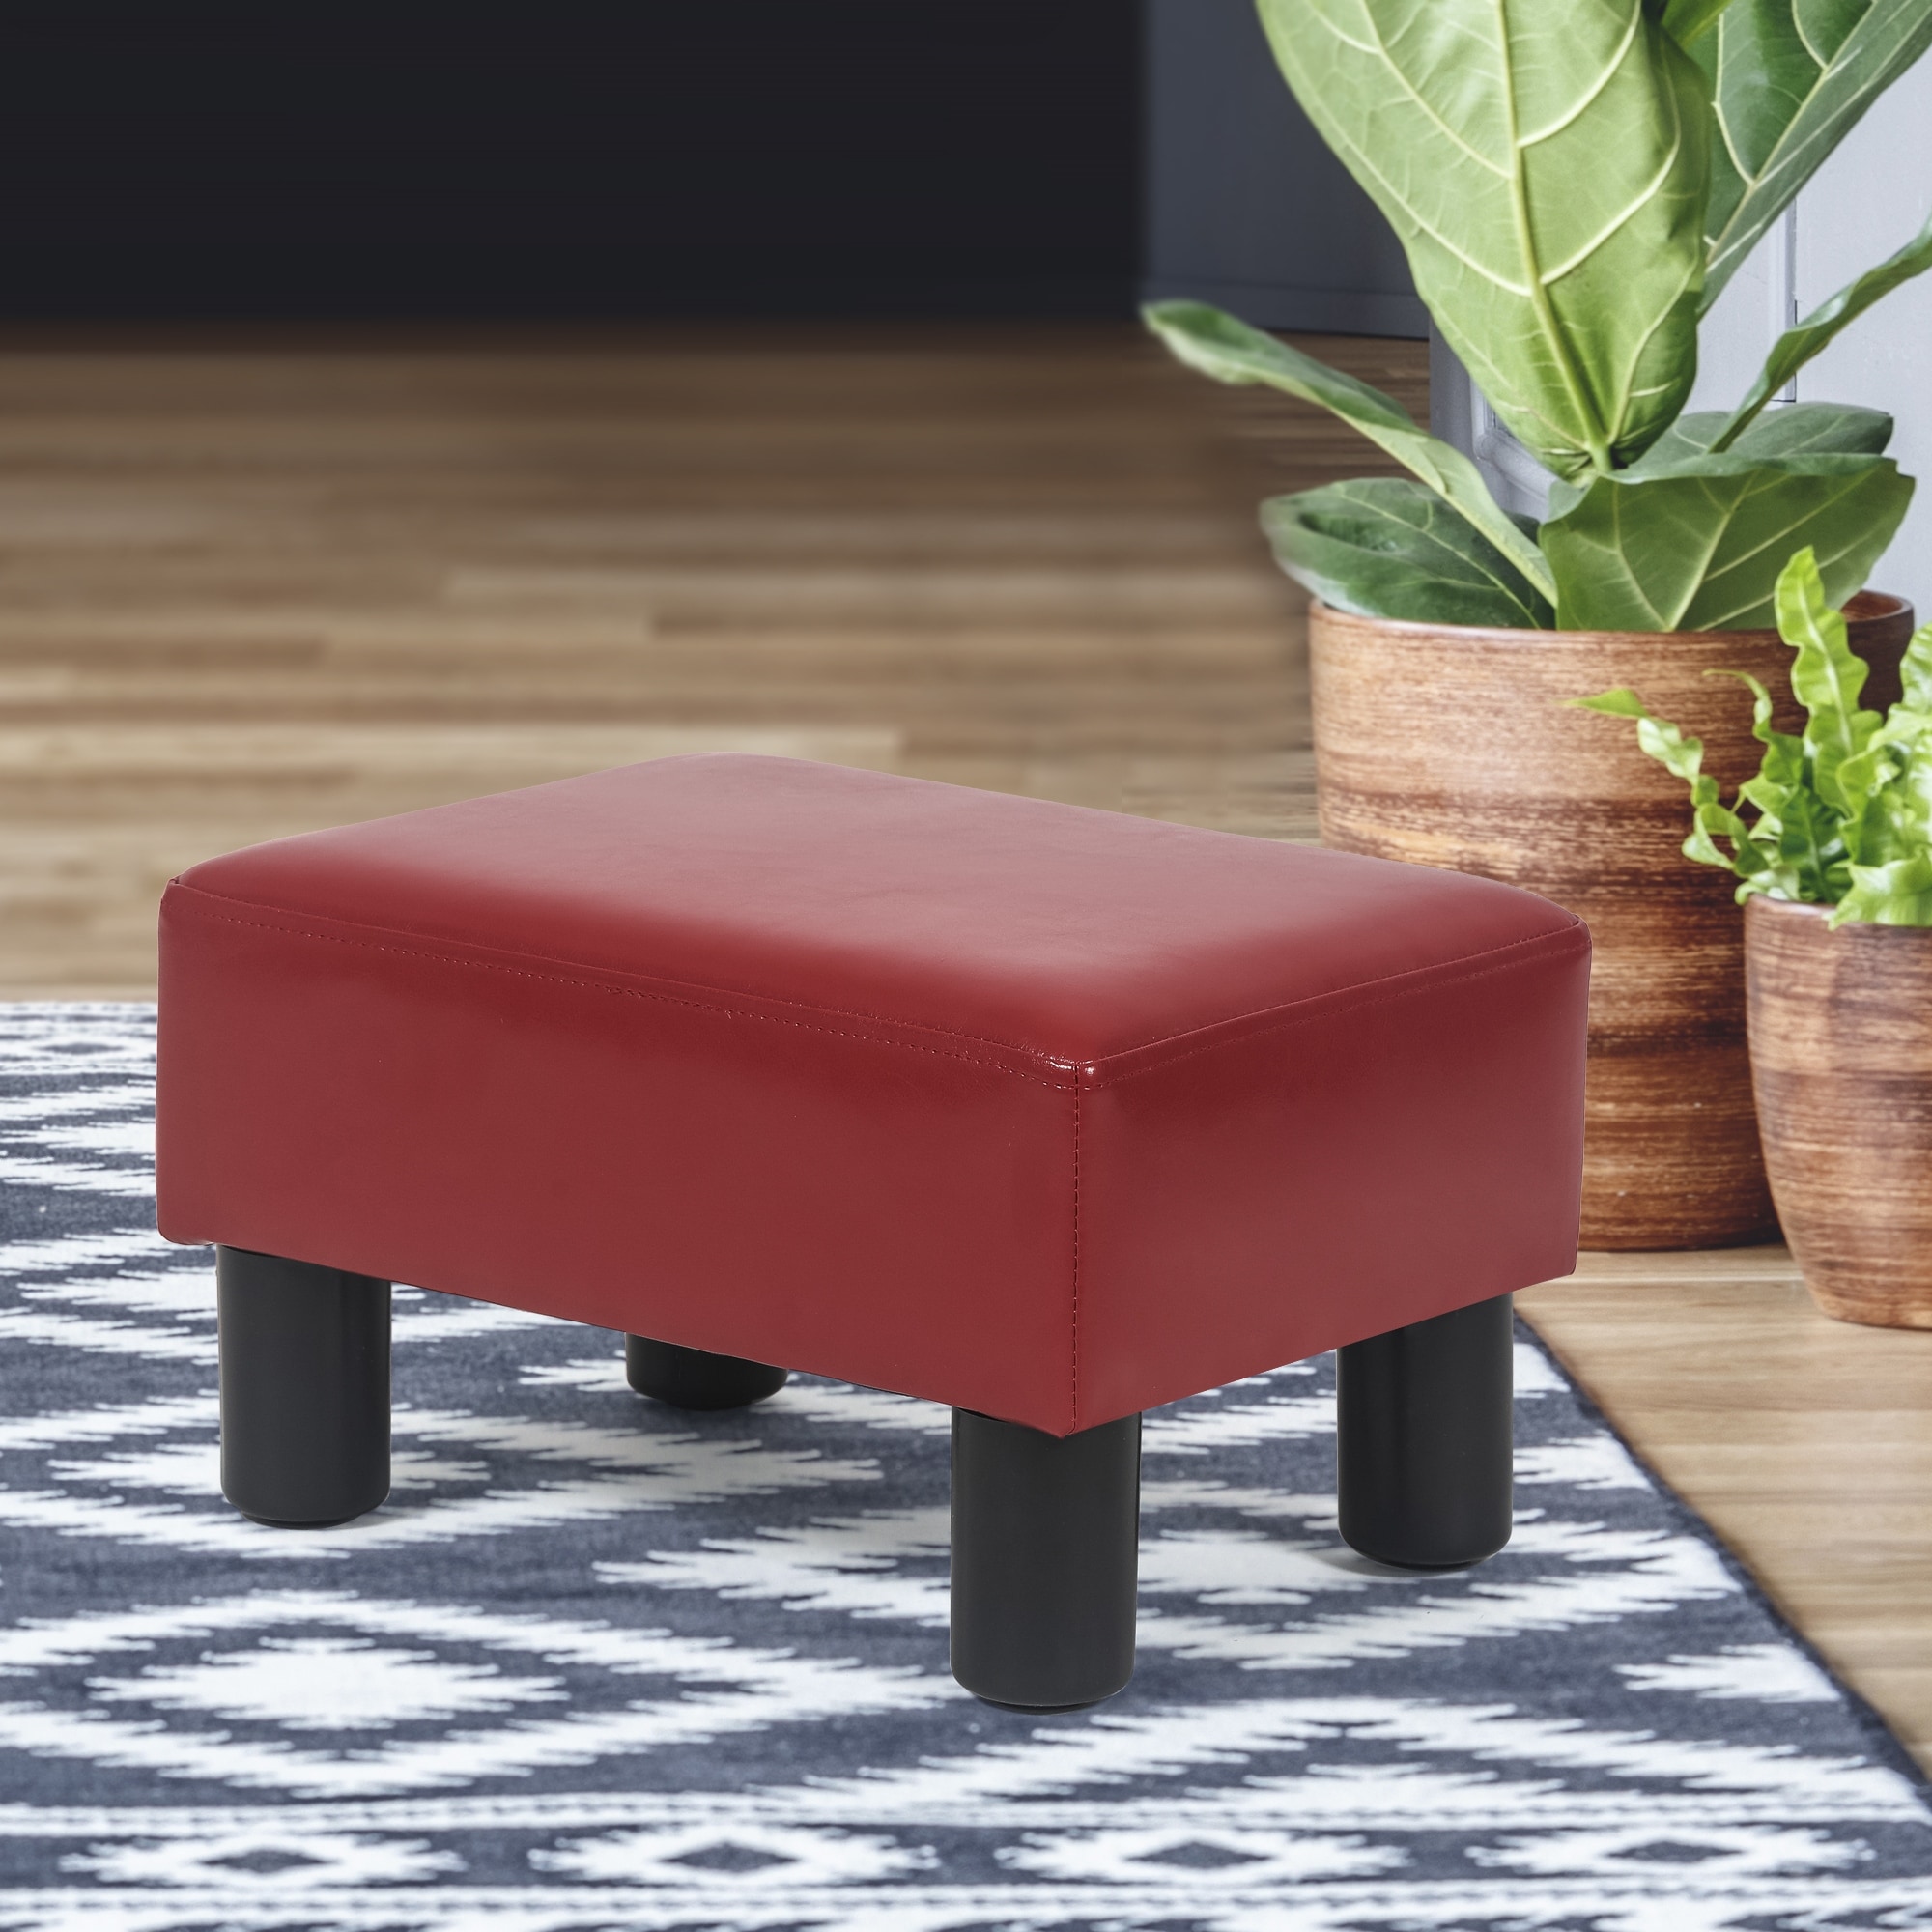 Adeco Small Footstool PU Leather Ottoman Footrest Modern Rectangular - On  Sale - Bed Bath & Beyond - 34859128